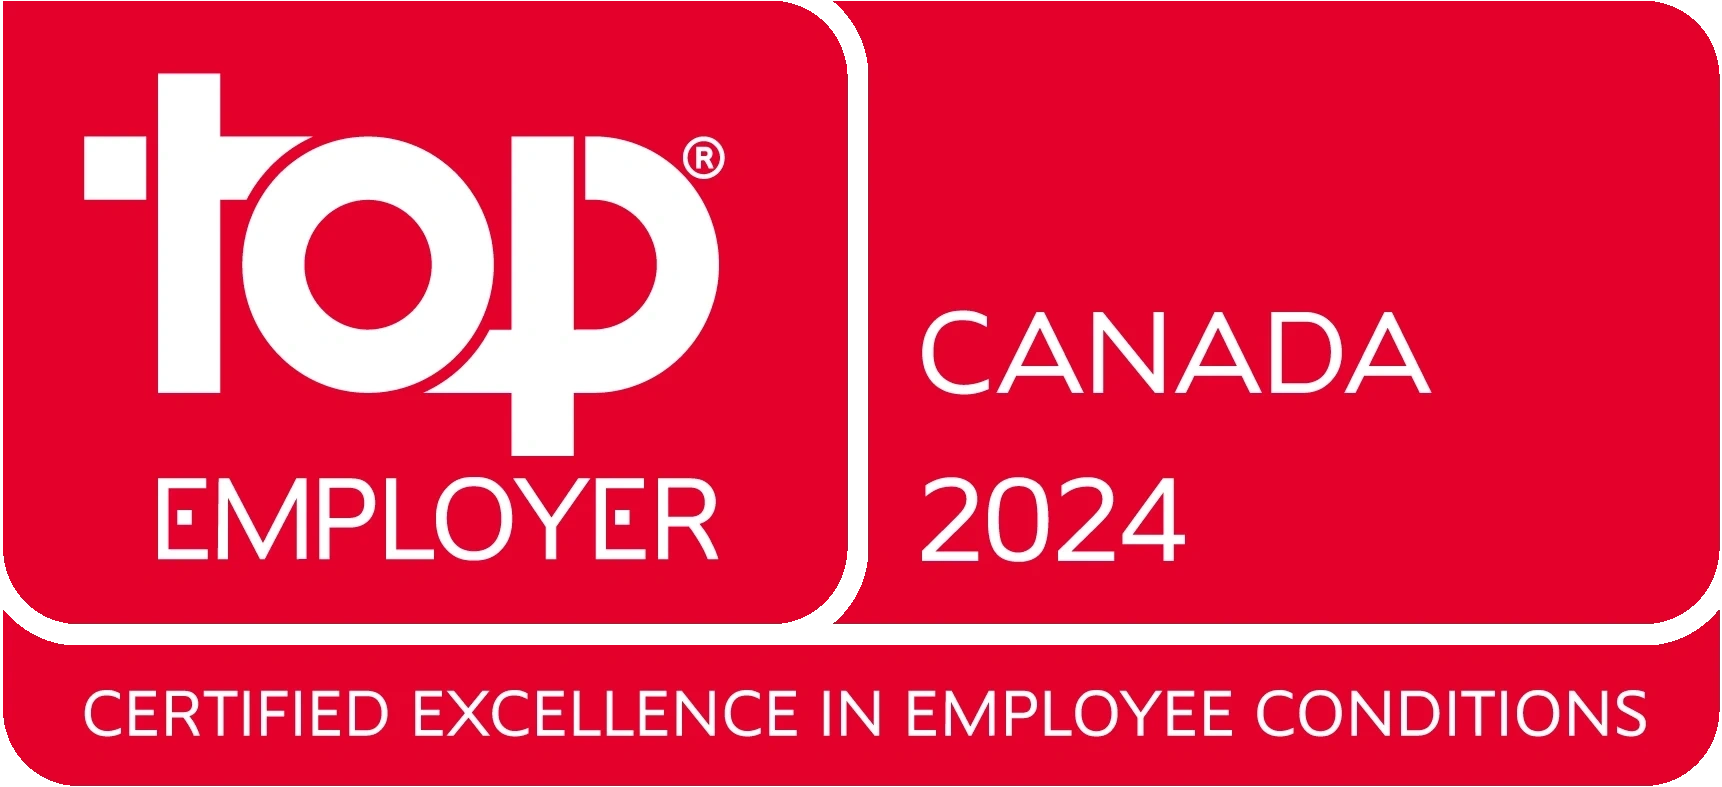 Top Employer in Canada